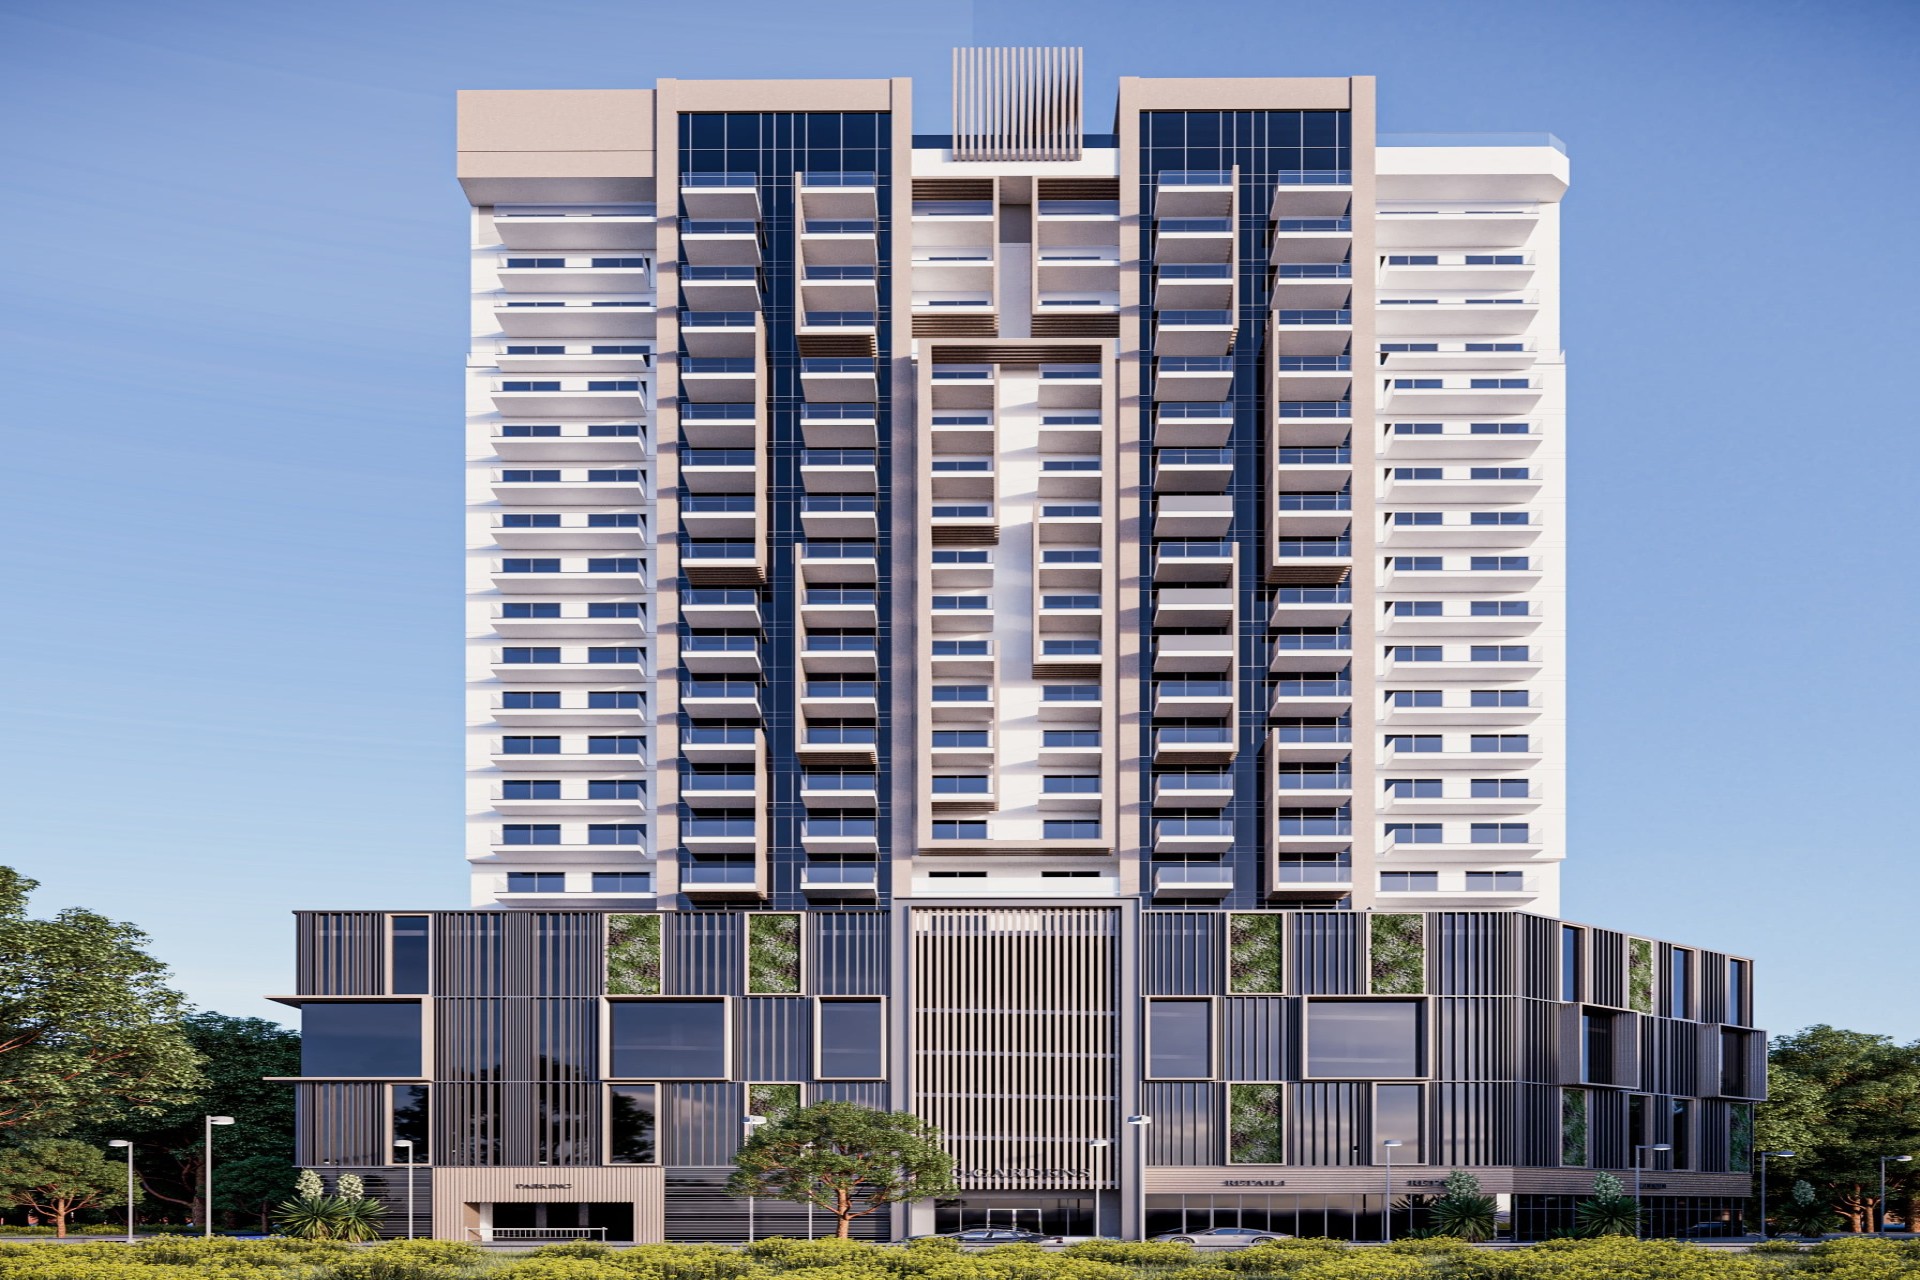  L - shaped building with 1&2 bedroom apartments in Arjan, Dubailand.